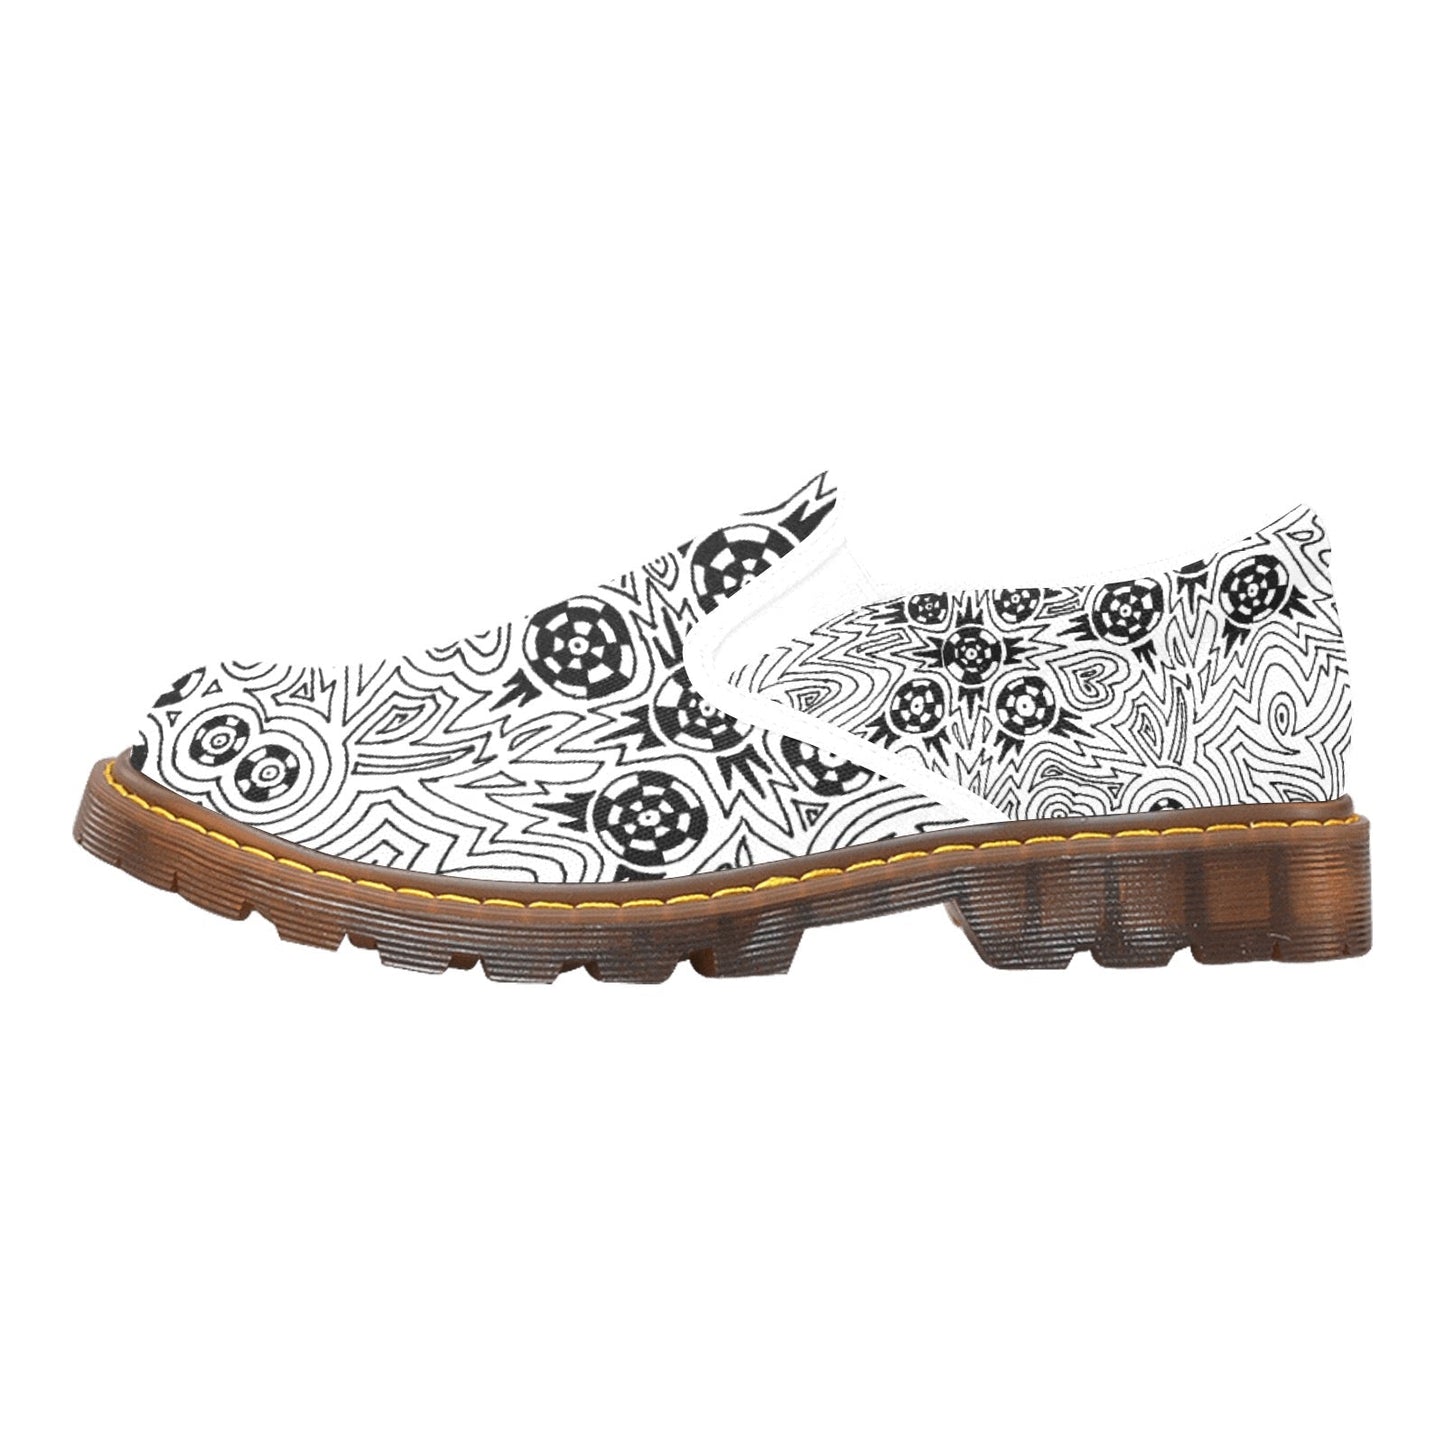 PAISLEY MDRN Men's Slip-On Loafer | CANAANWEAR | Shoes |